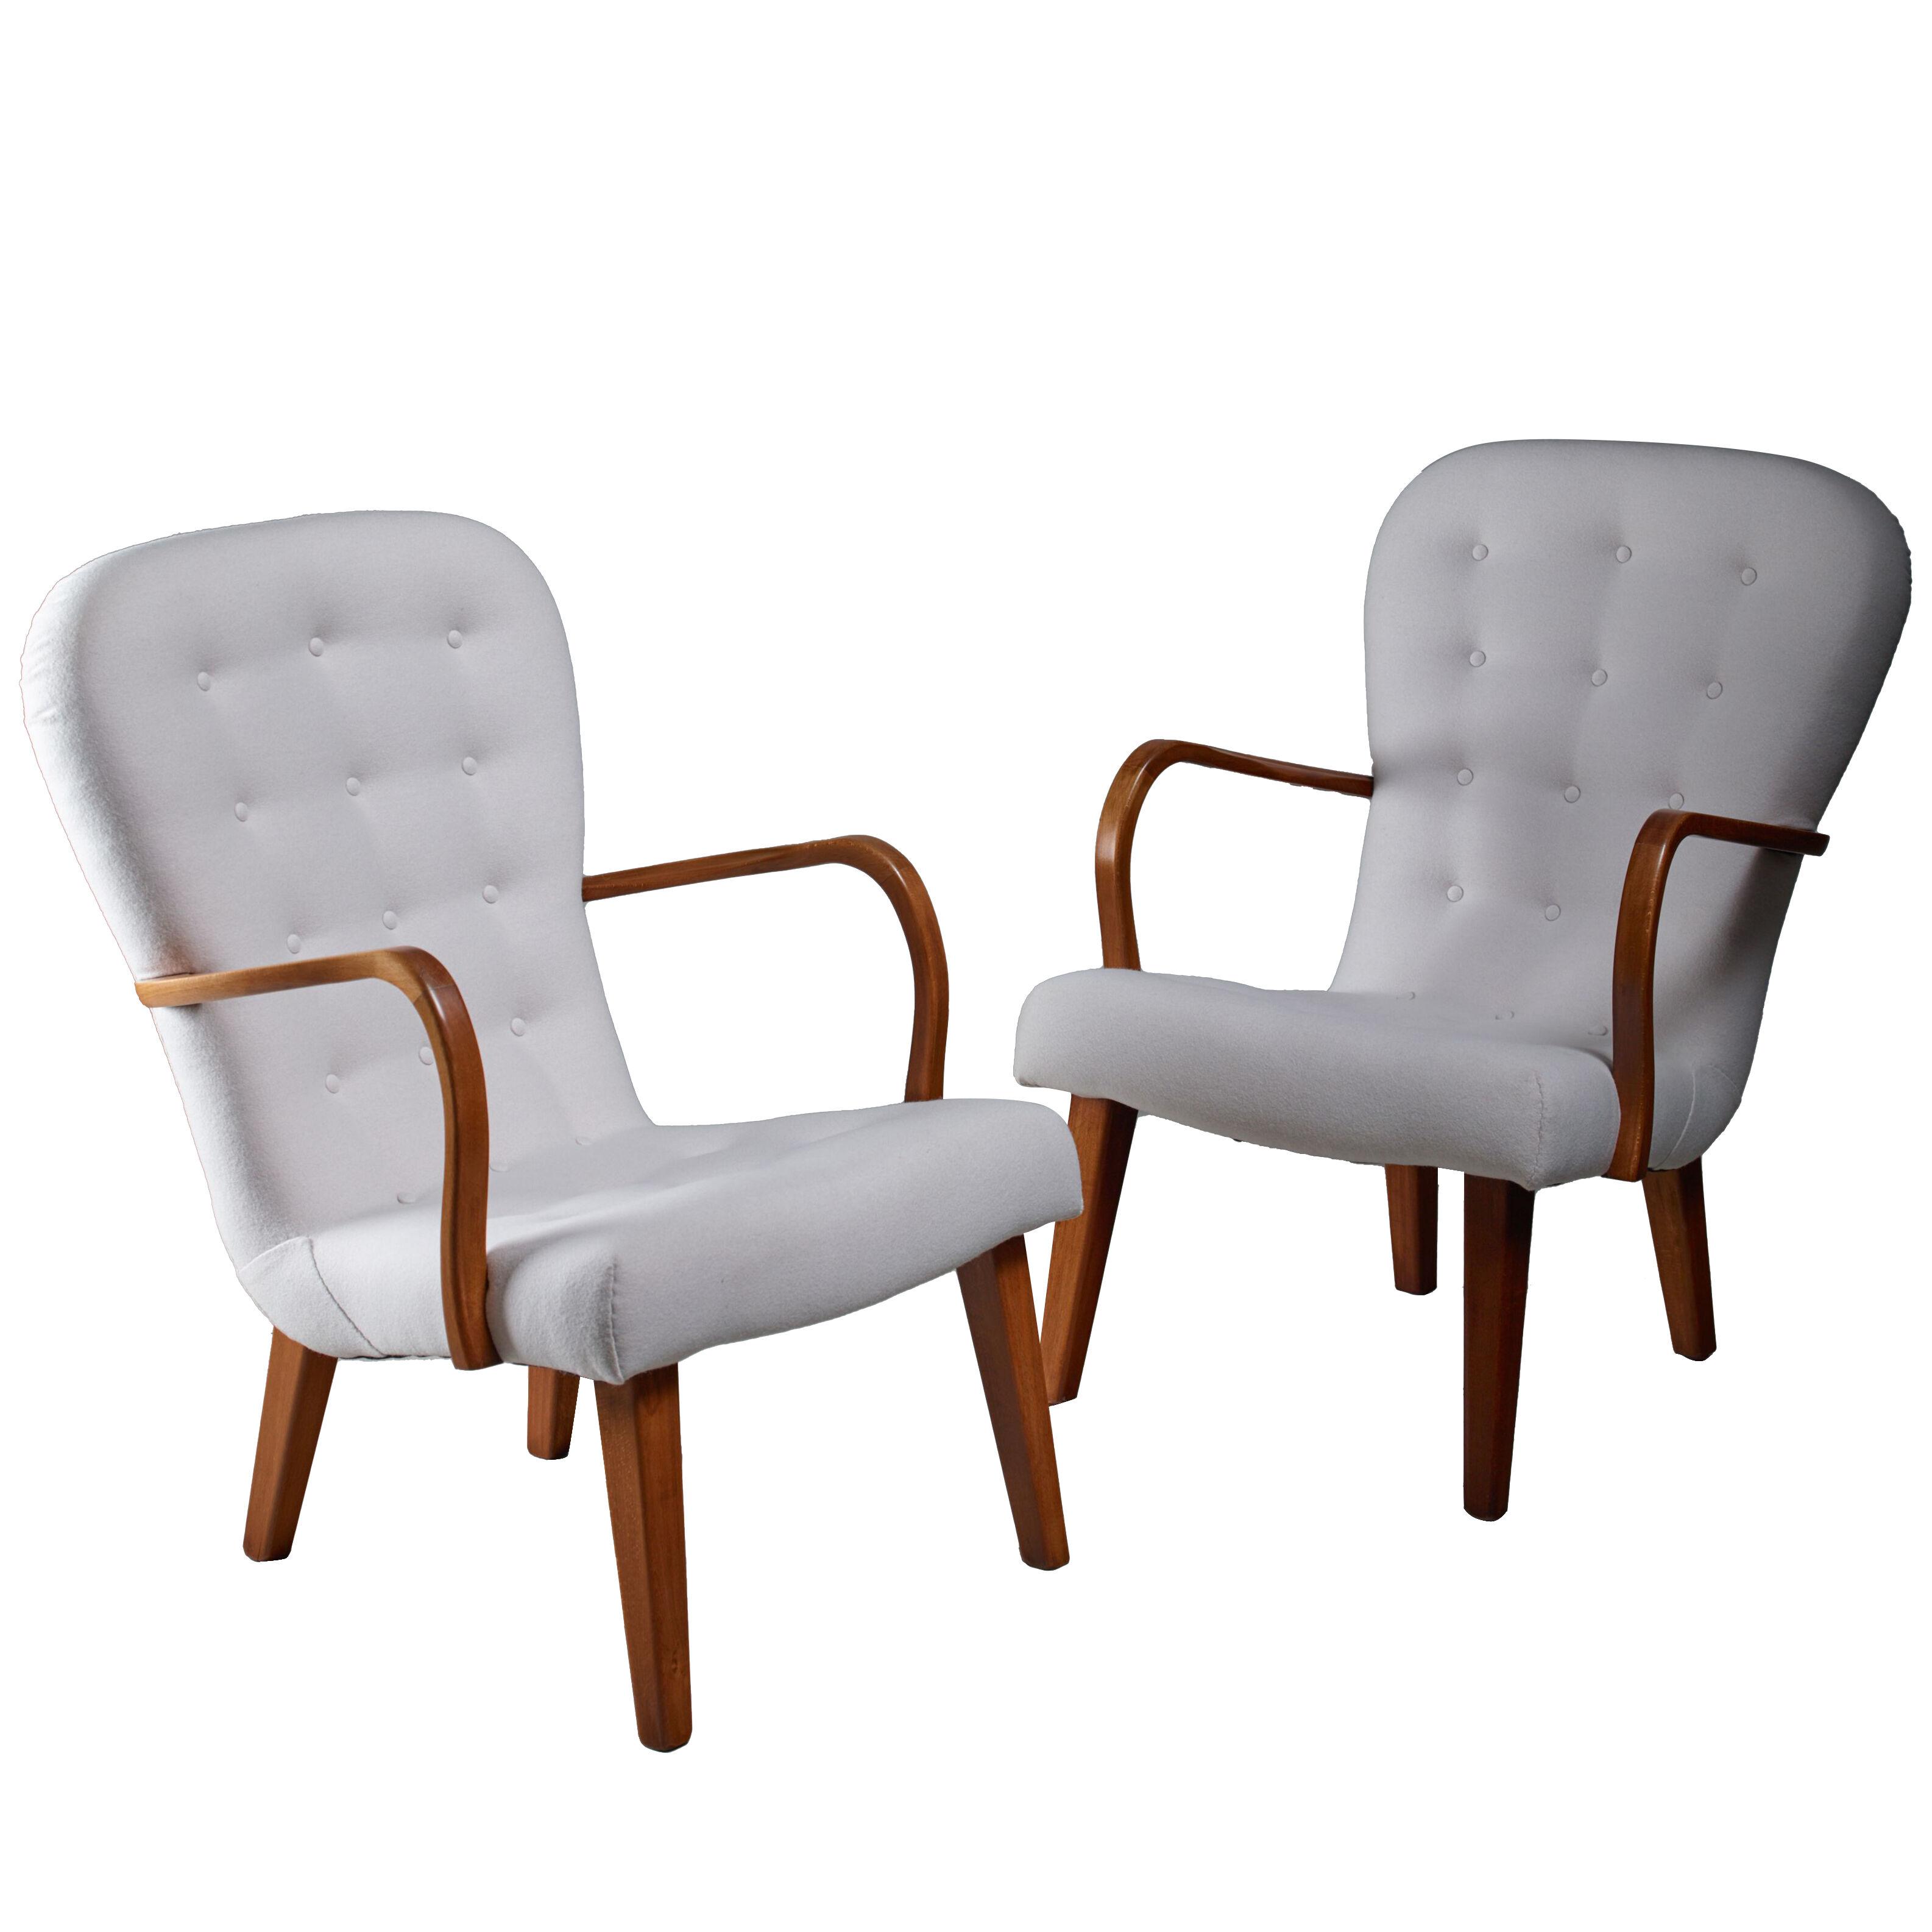 Pair of Lounge Chairs with Curved Armrests, Denmark, 1940s